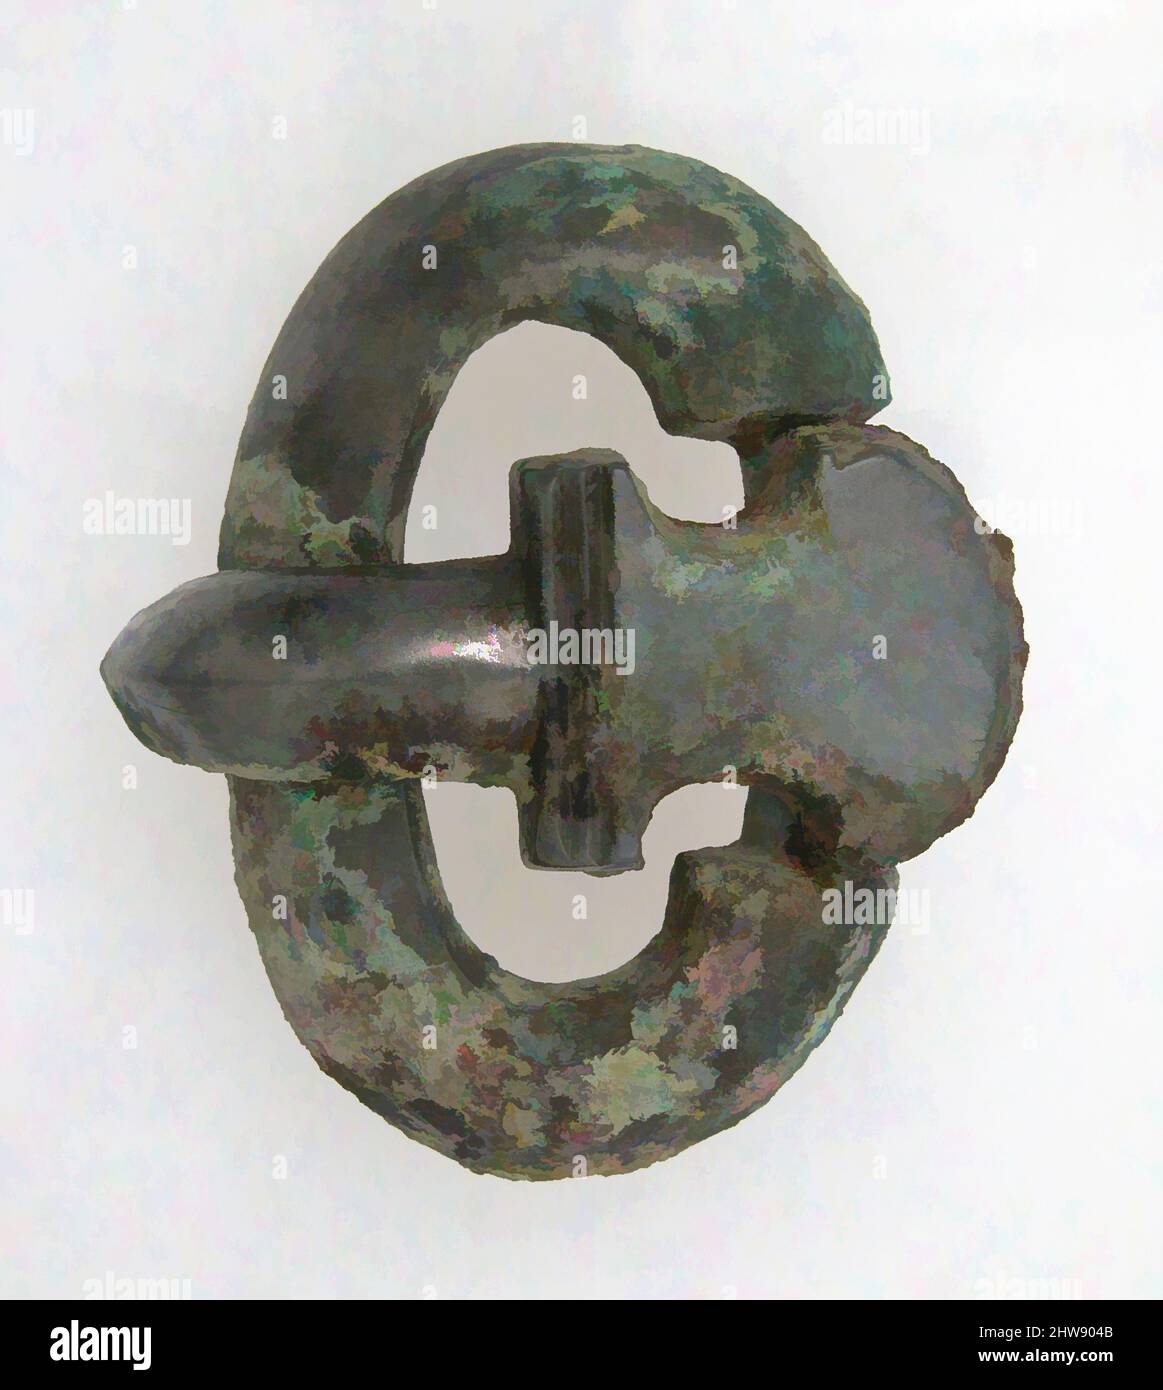 Art inspired by Belt Tongue and Oval Loop from a Buckle, 7th century, Frankish, Silvered Copper alloy, Overall: 1 3/4 x 1 7/16 x 9/16 in. (4.4 x 3.7 x 1.4 cm), Metalwork-Copper alloy, Classic works modernized by Artotop with a splash of modernity. Shapes, color and value, eye-catching visual impact on art. Emotions through freedom of artworks in a contemporary way. A timeless message pursuing a wildly creative new direction. Artists turning to the digital medium and creating the Artotop NFT Stock Photo